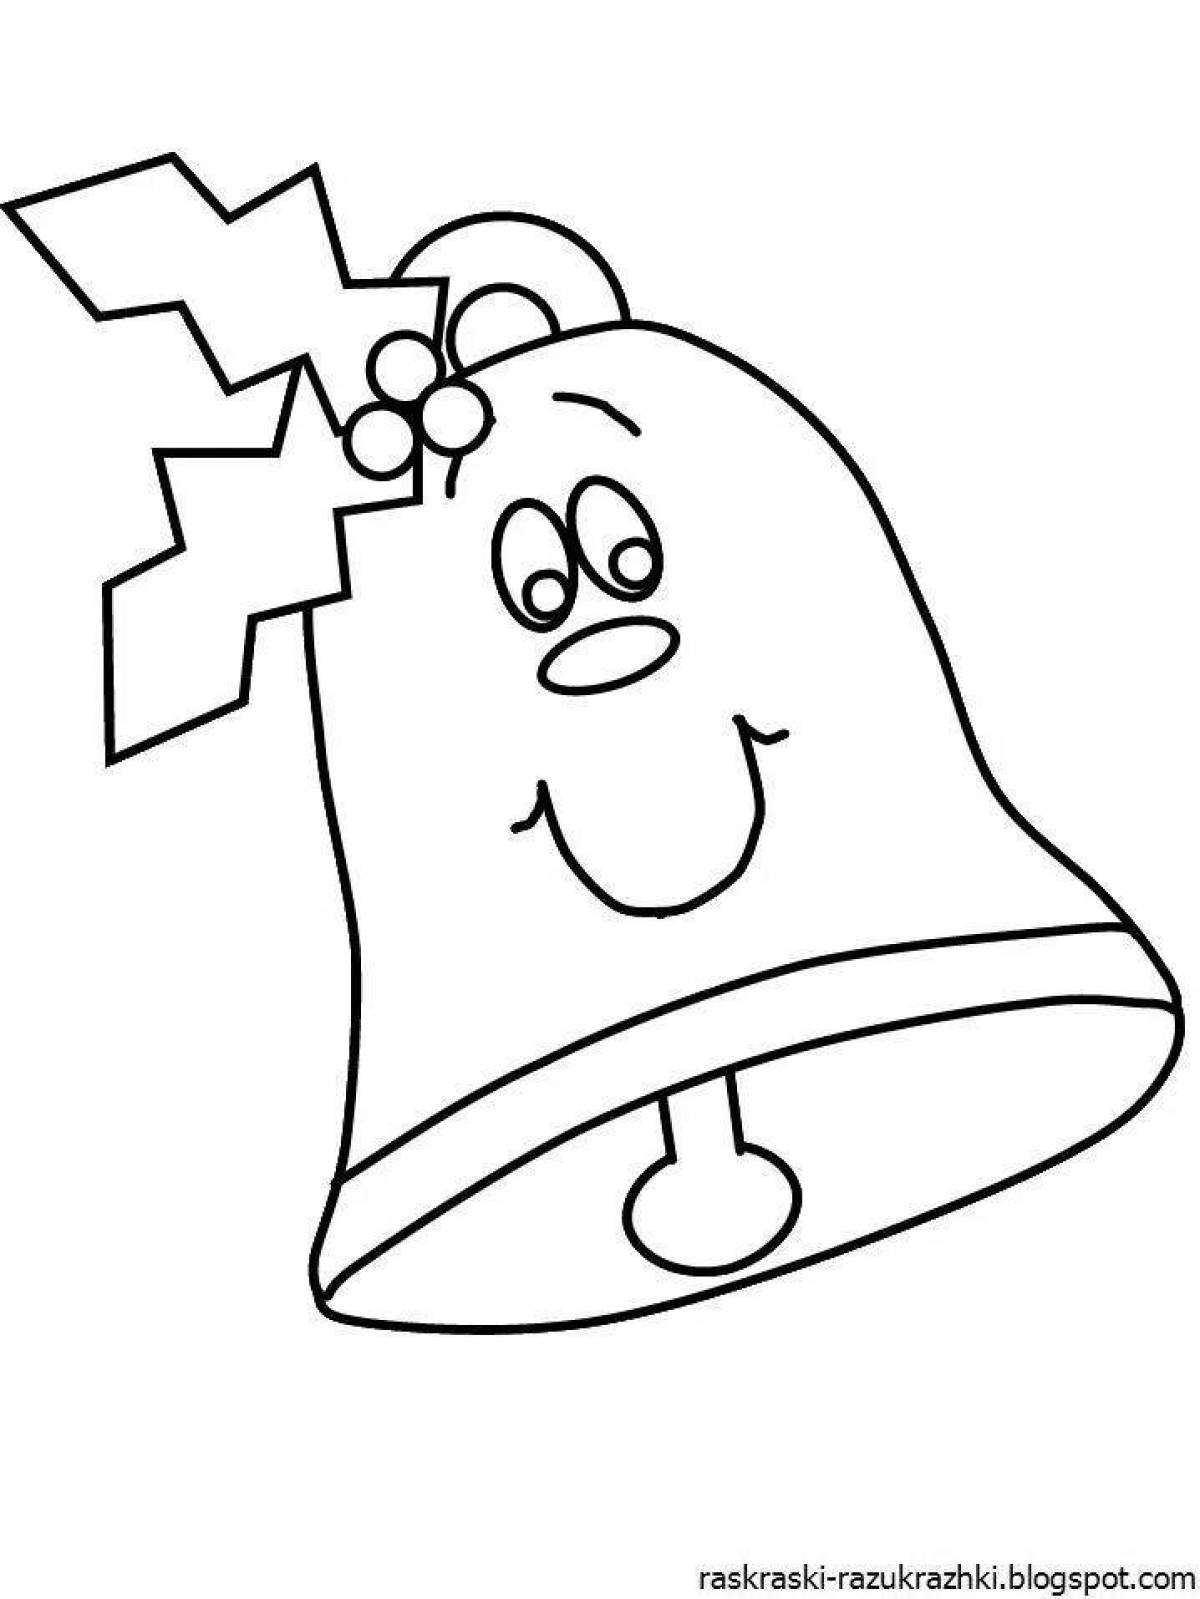 Animated school bell coloring page